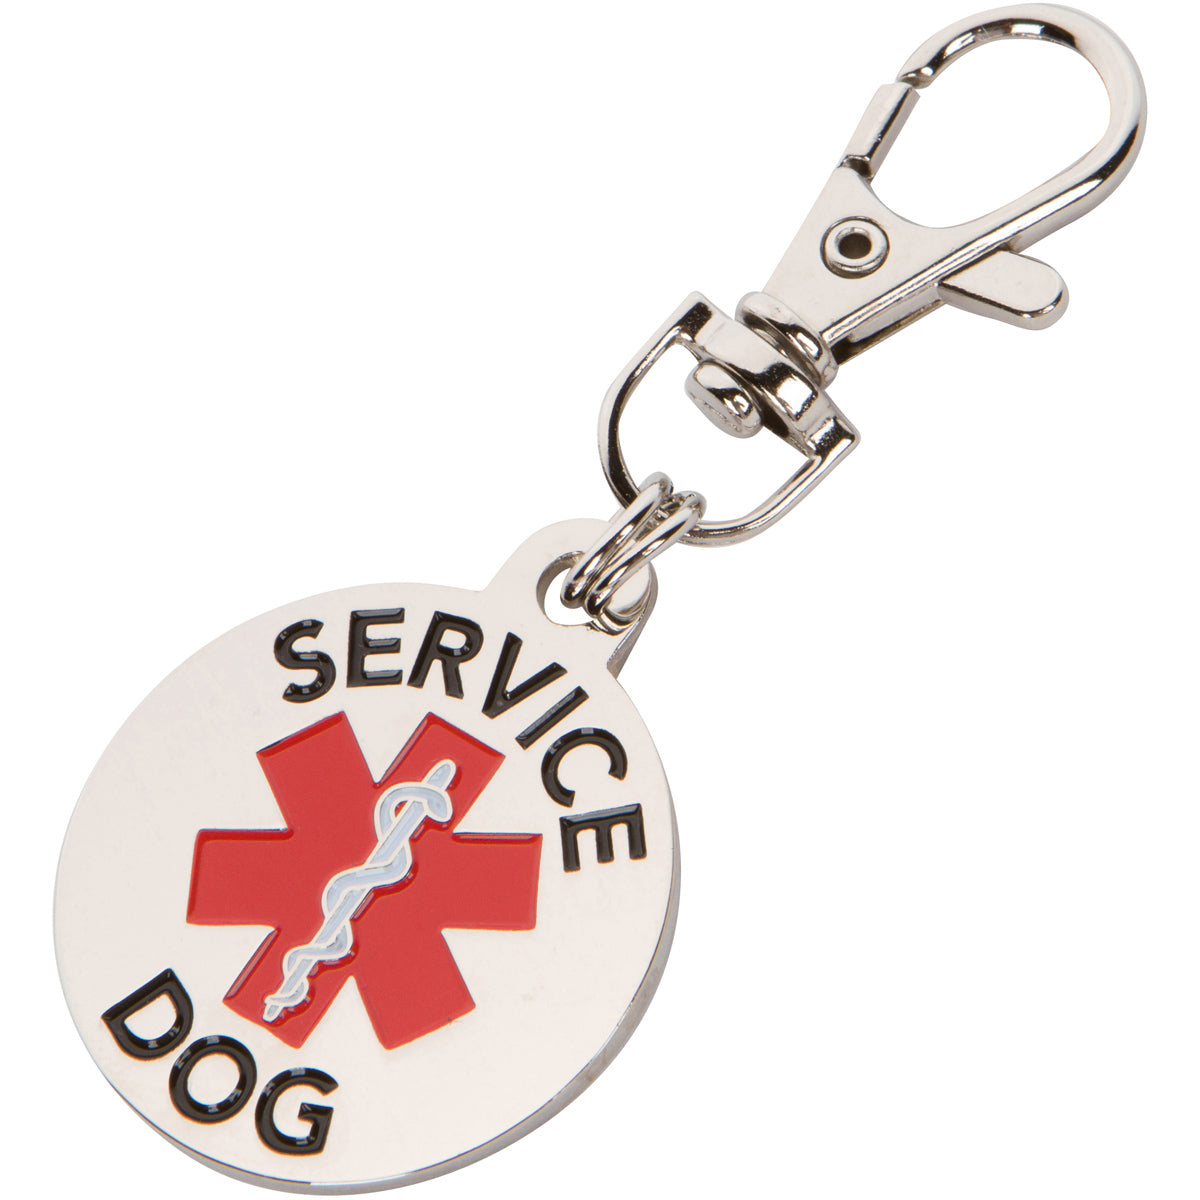 Service Dog Tag Medium to Large Breed Double Sided Red Medical Alert Symbol 1.25 inch ID Tag. Easily Switch Between Service Dog Vest Collars and Harness - K9King